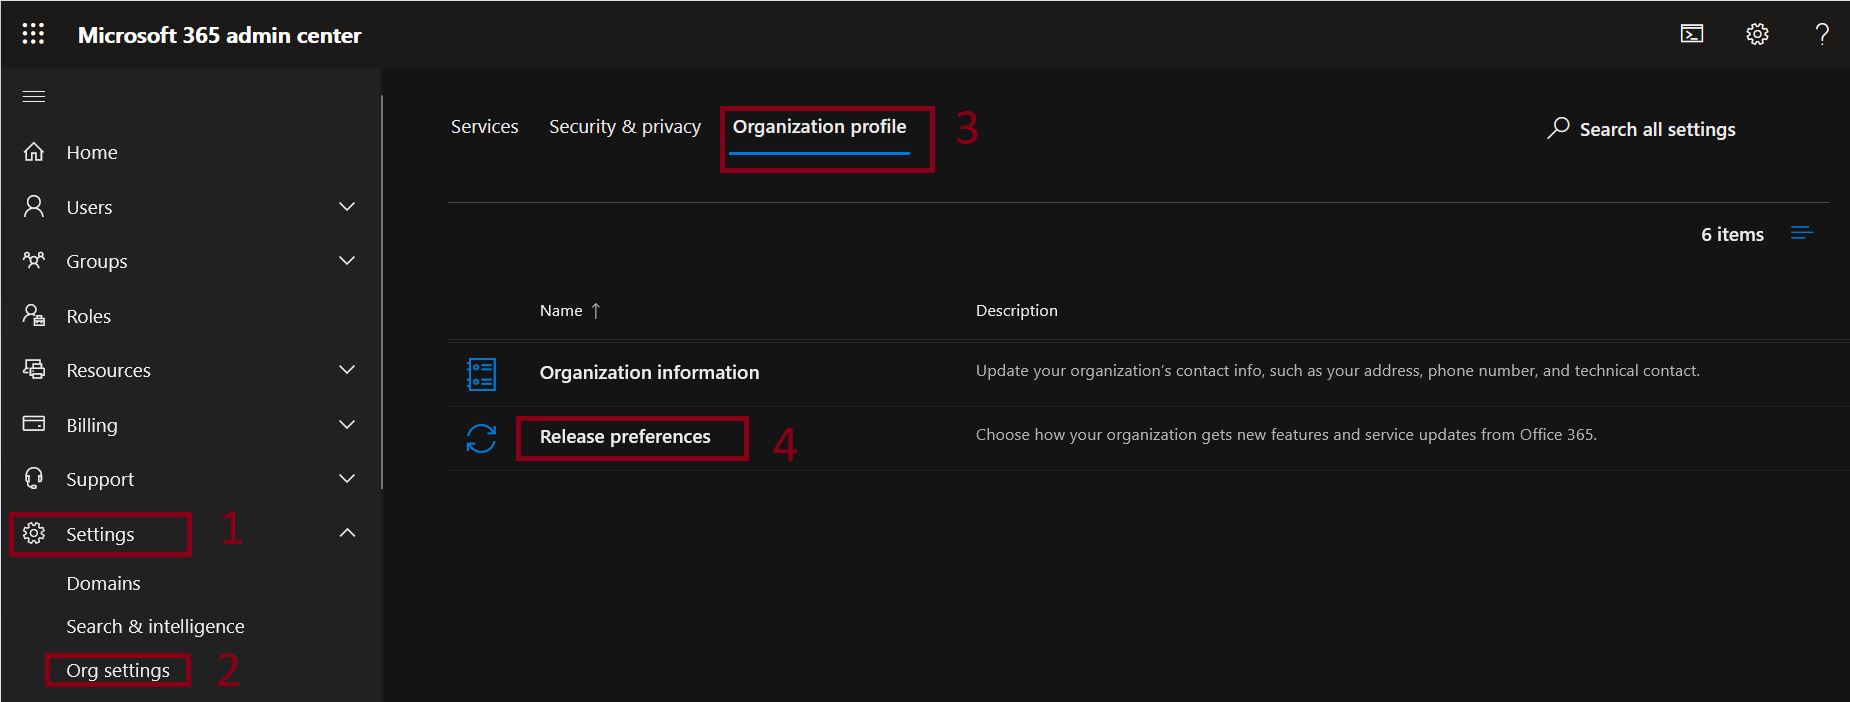 Microsoft 365 new features - Choose how your organization gets new features and service updates from ‎Office 365